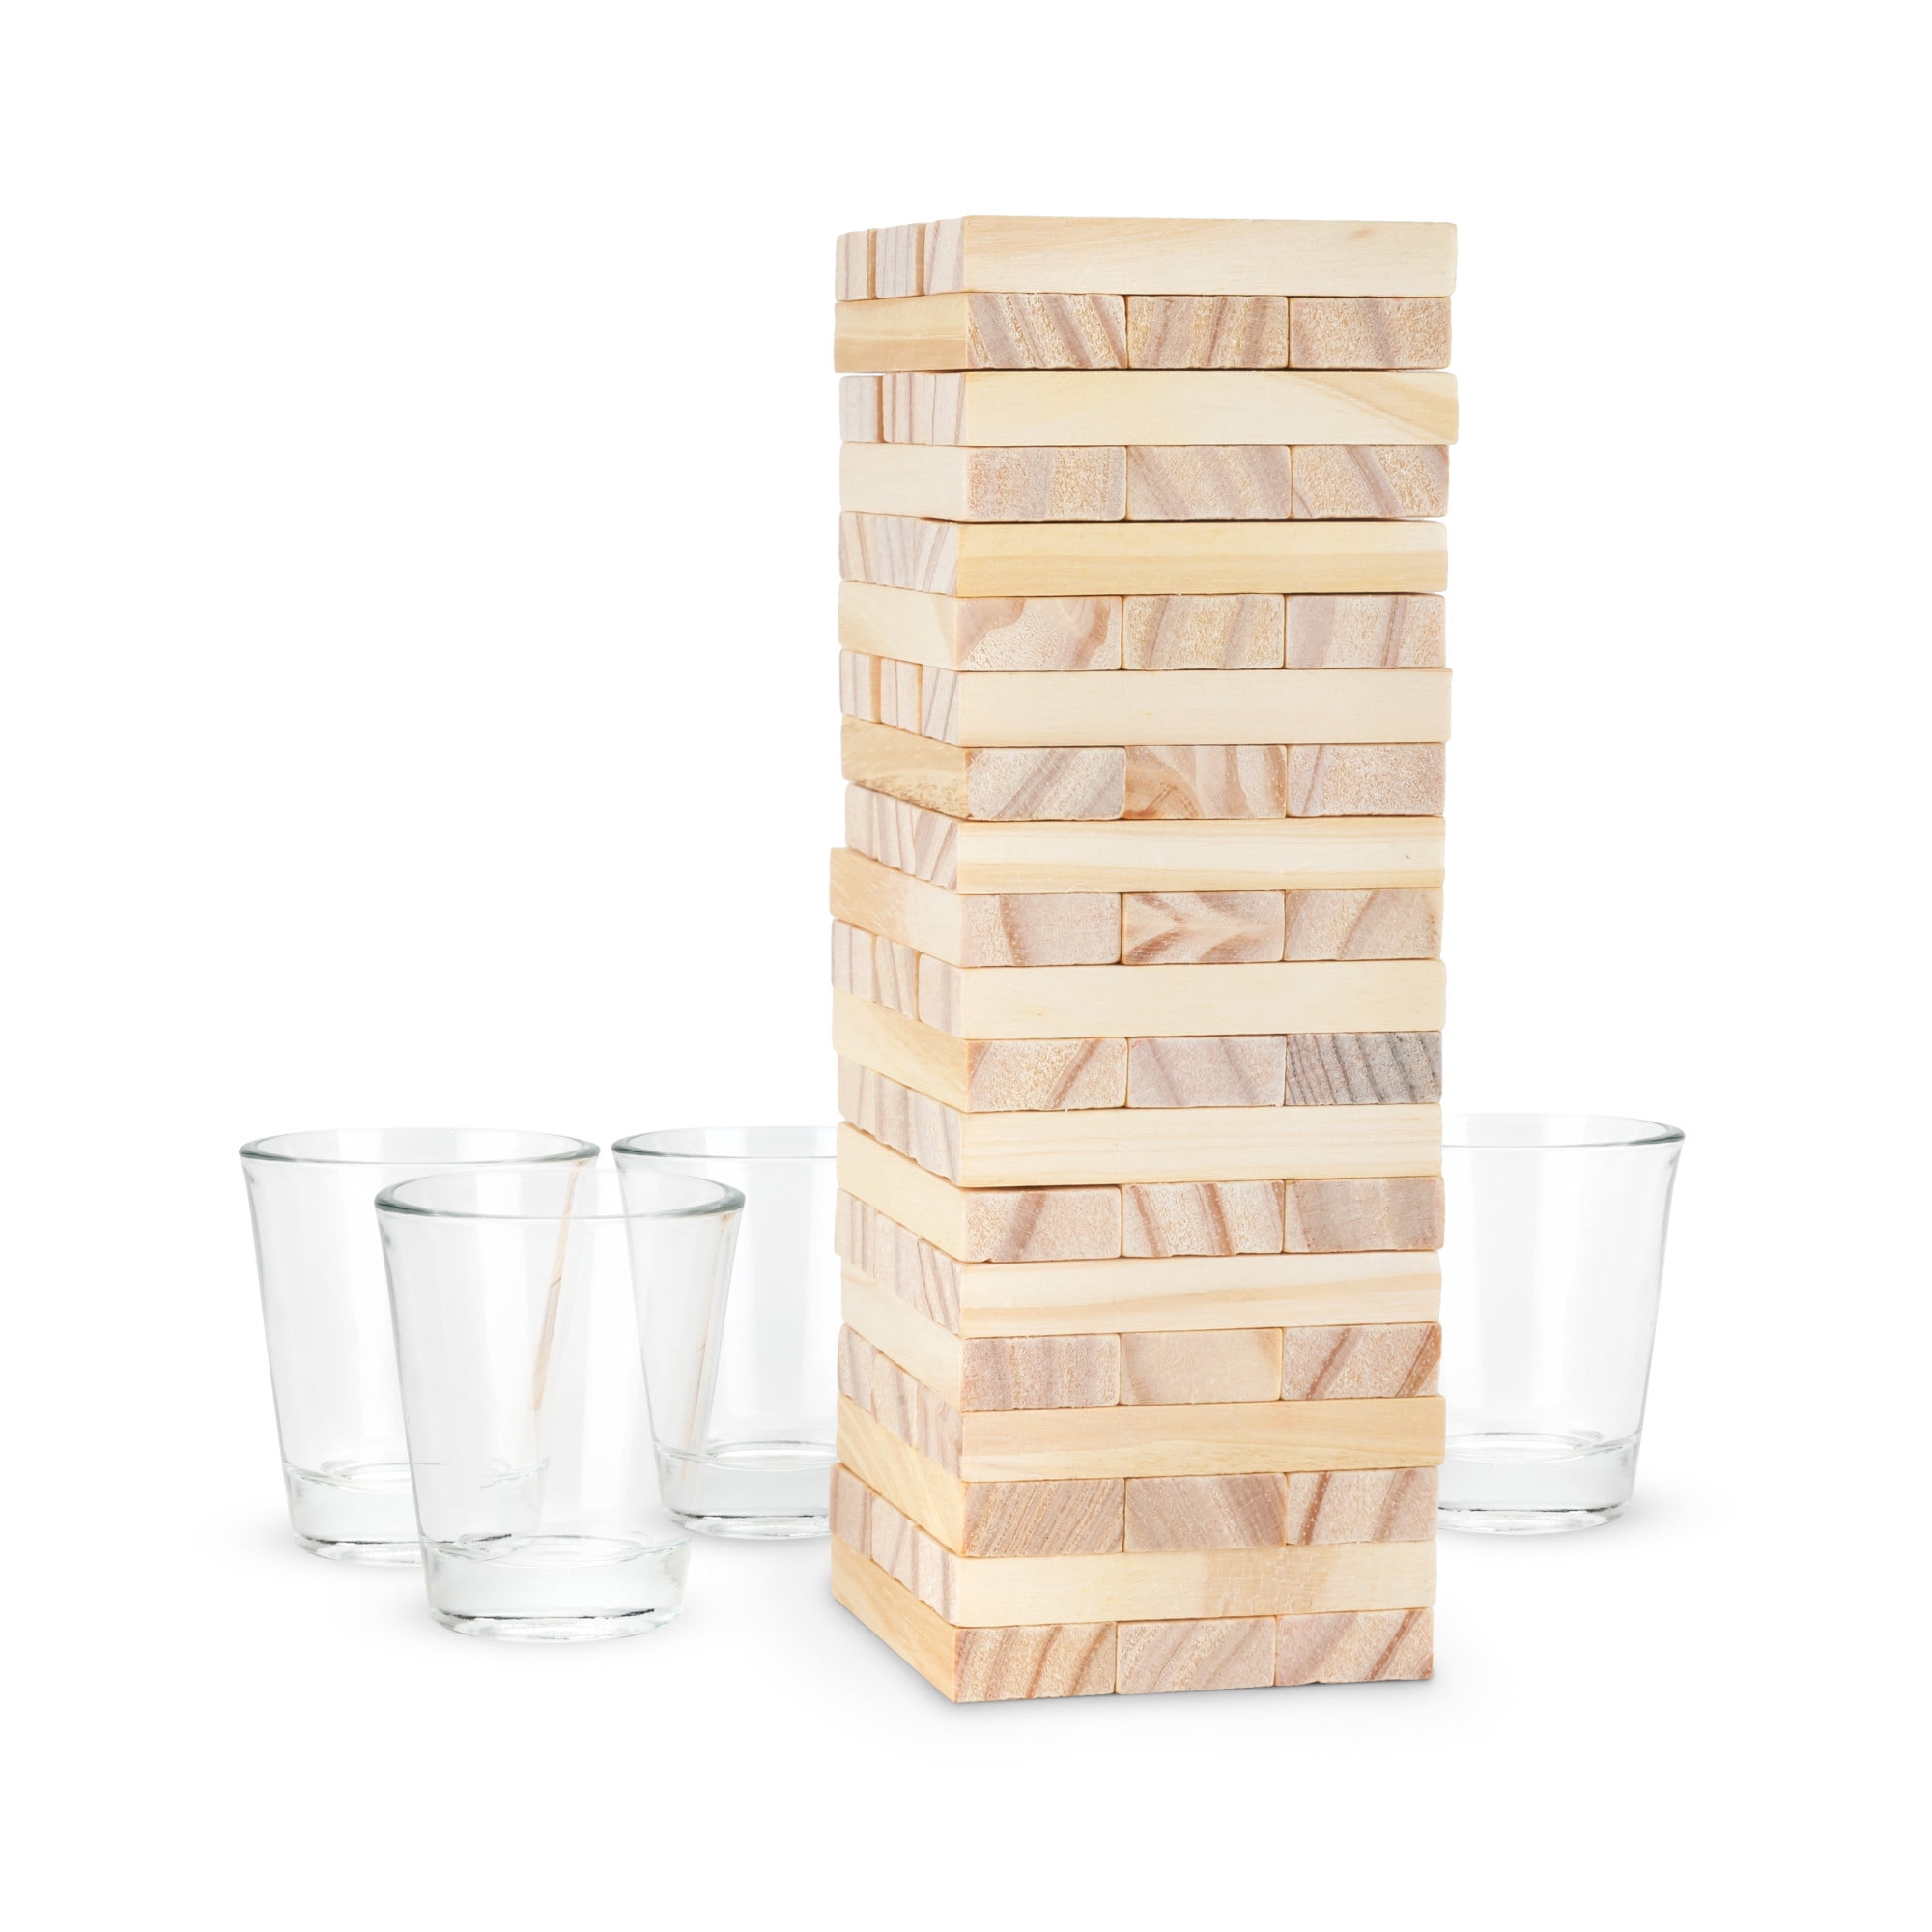 ICUP iPartyHard - Drunken Tower: The Grab A Piece Adult Drinking Game  includes 60 wooden blocks^ 4 glass shot glasses